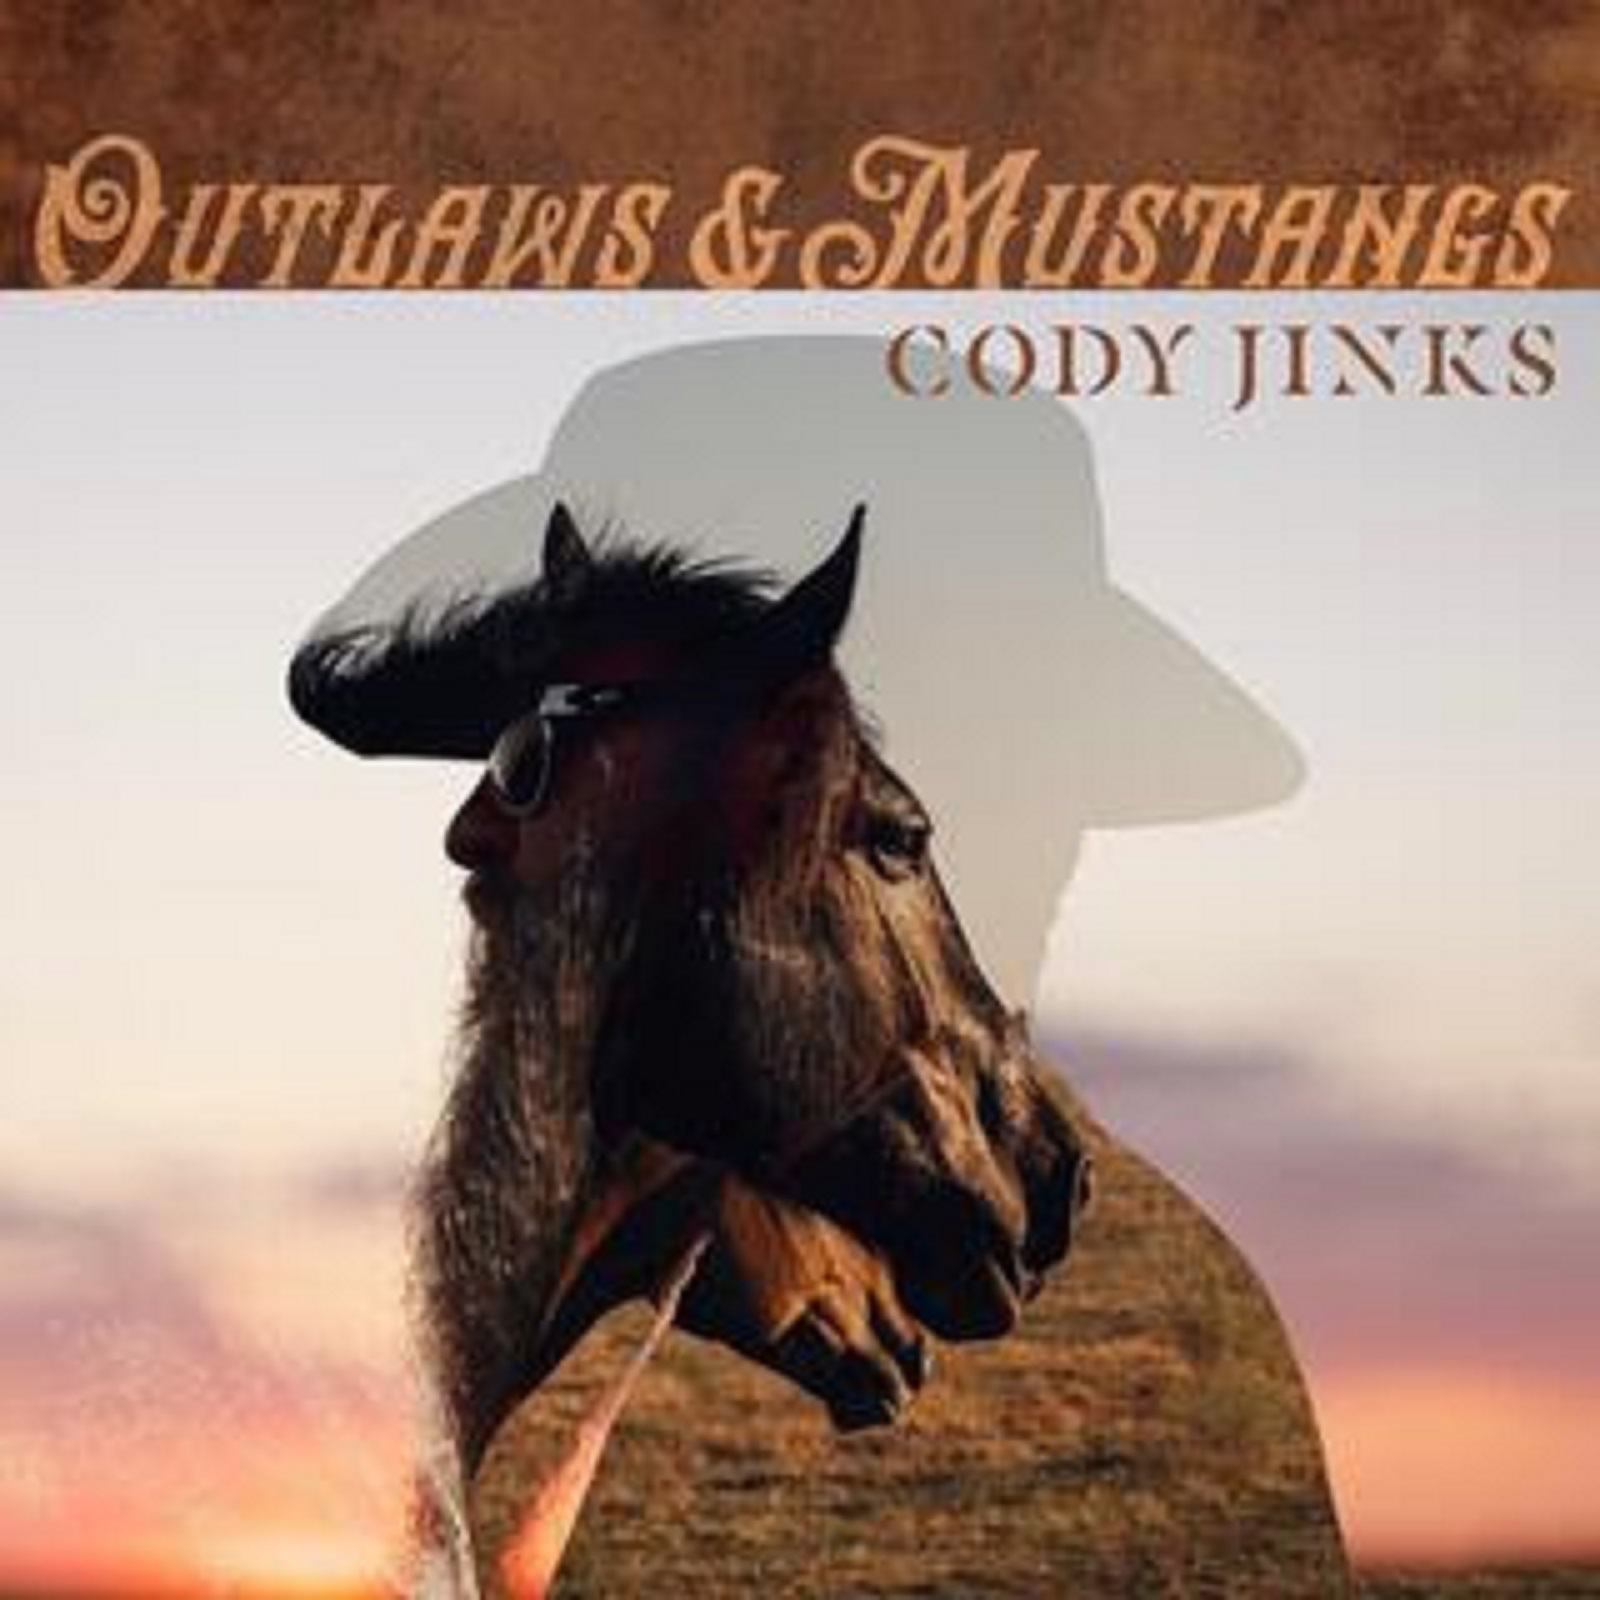 Cody Jinks’ new single “Outlaws and Mustangs” debuts today